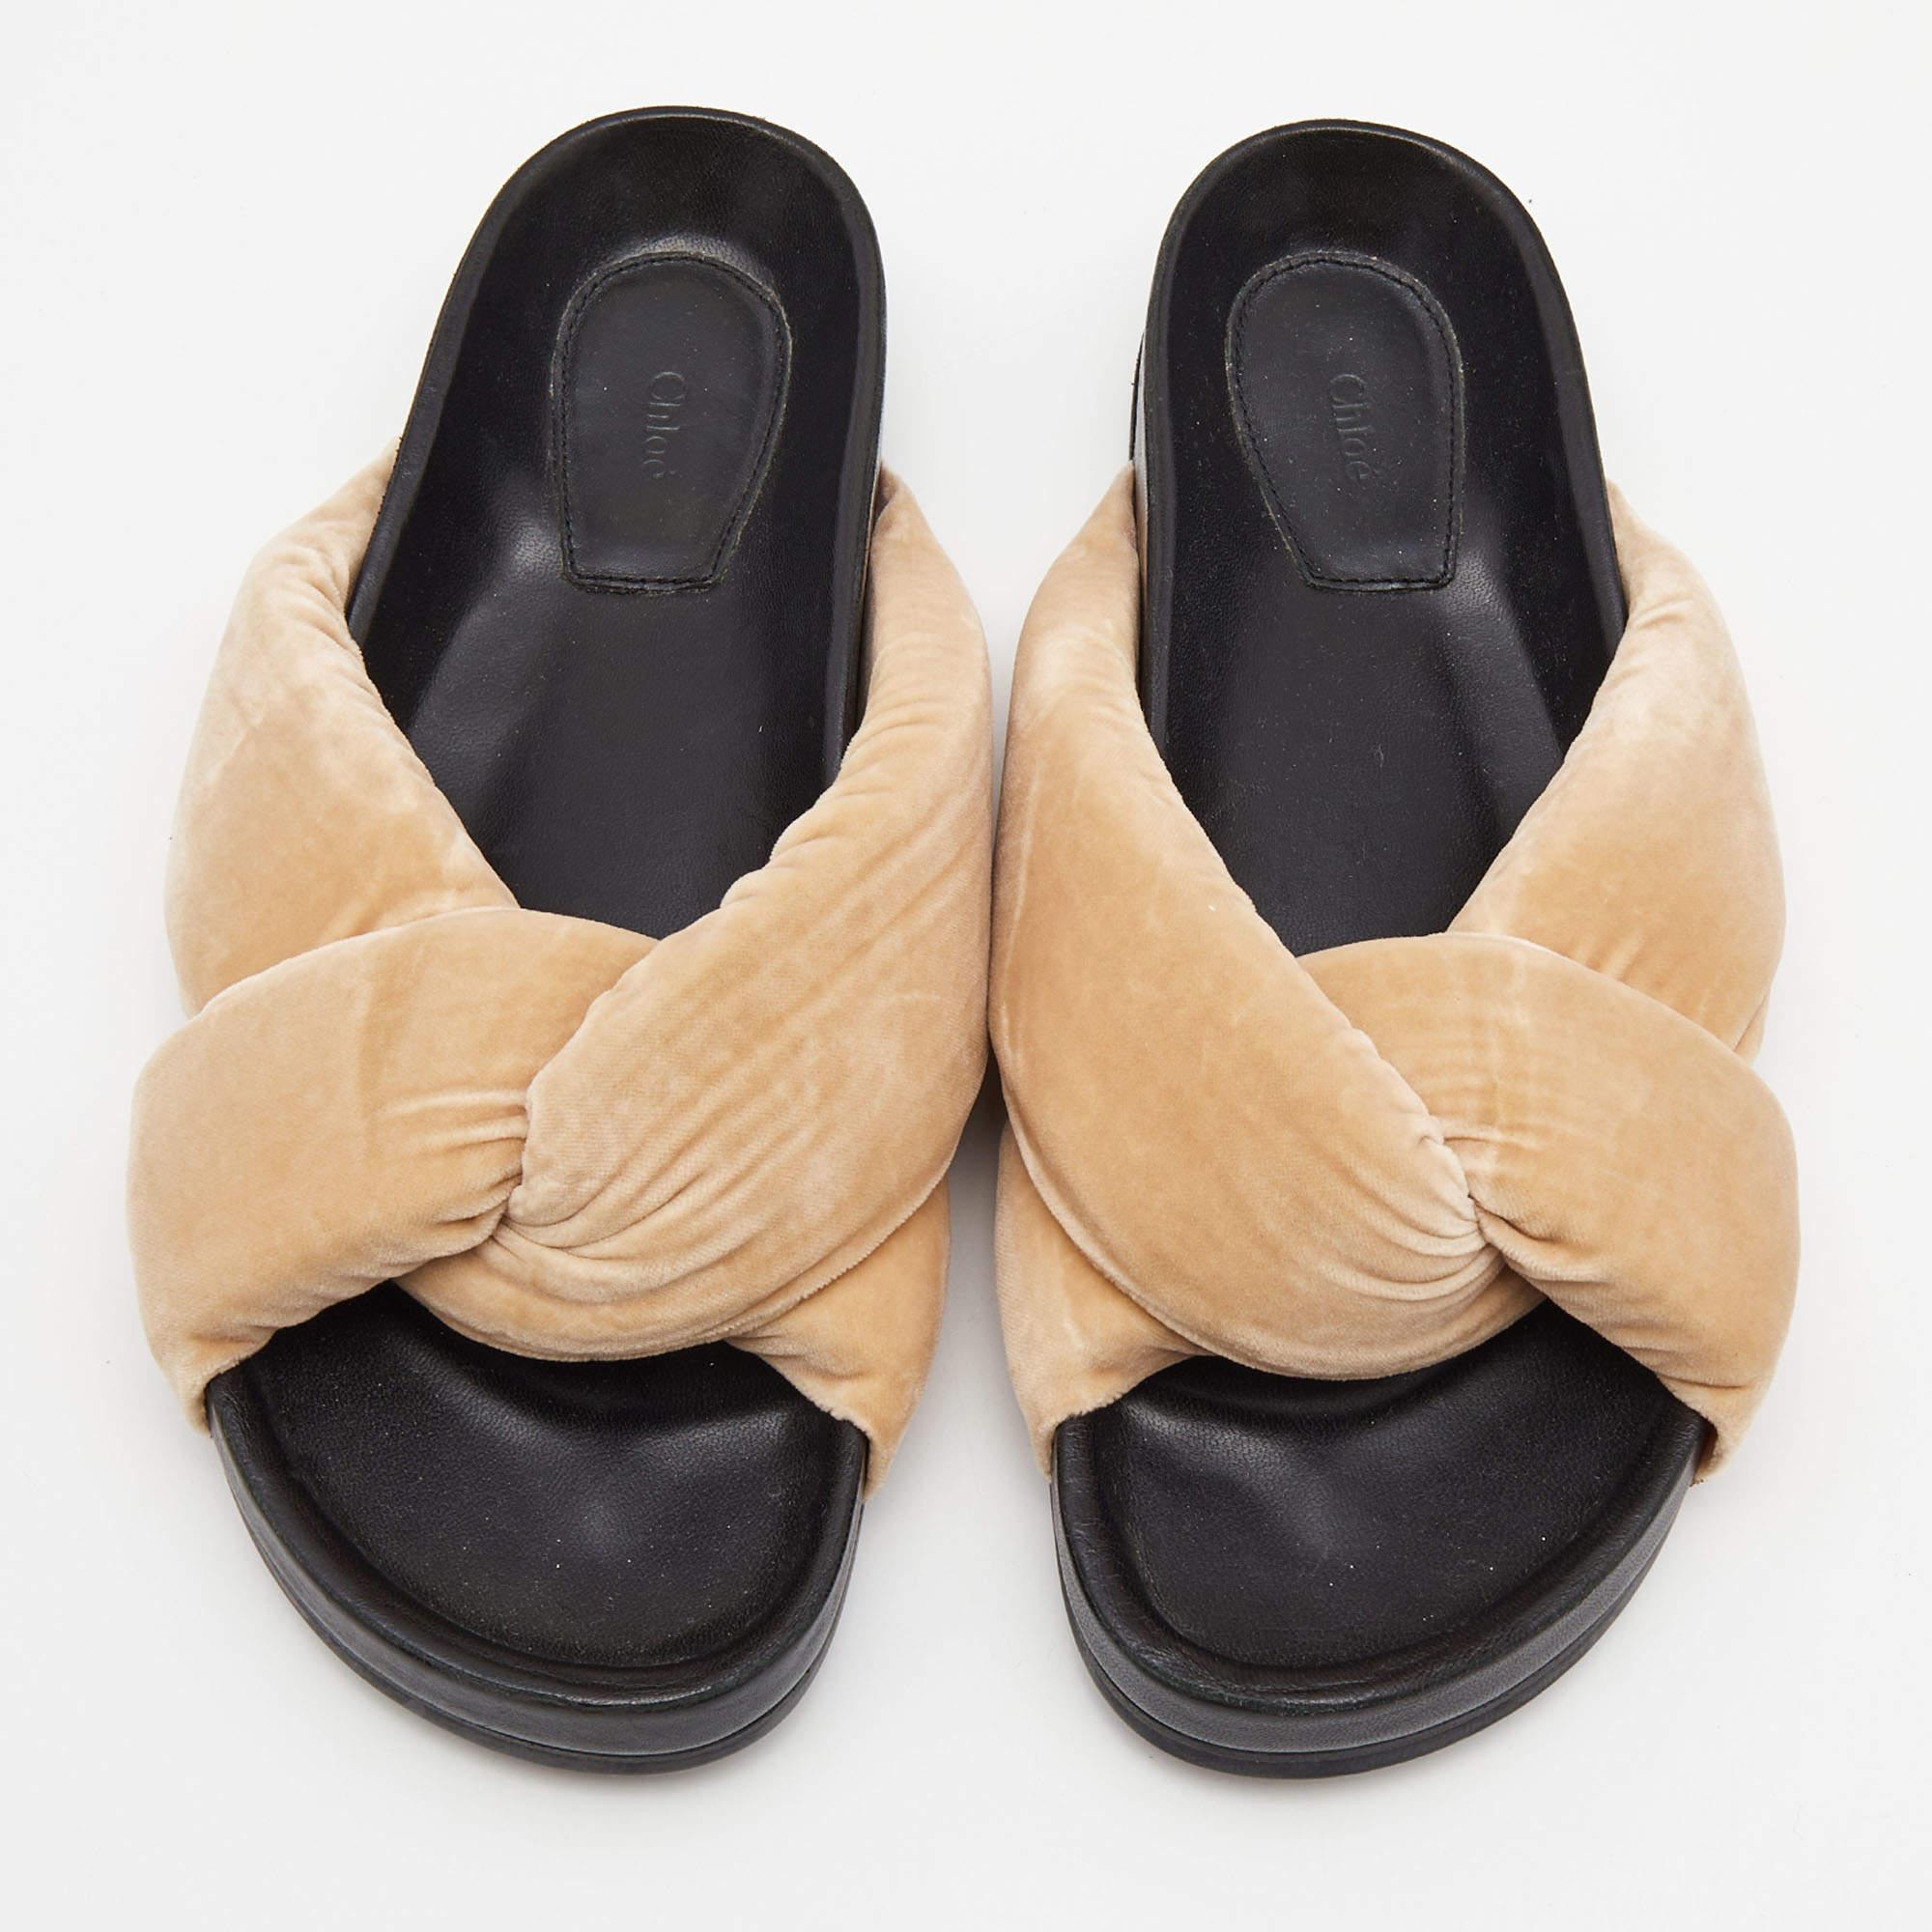 A perfect blend of luxury, style, and comfort, these designer slides are made using quality materials and frame your feet in the most practical way. They can be paired with a host of outfits from your wardrobe.

Includes
Original Dustbag